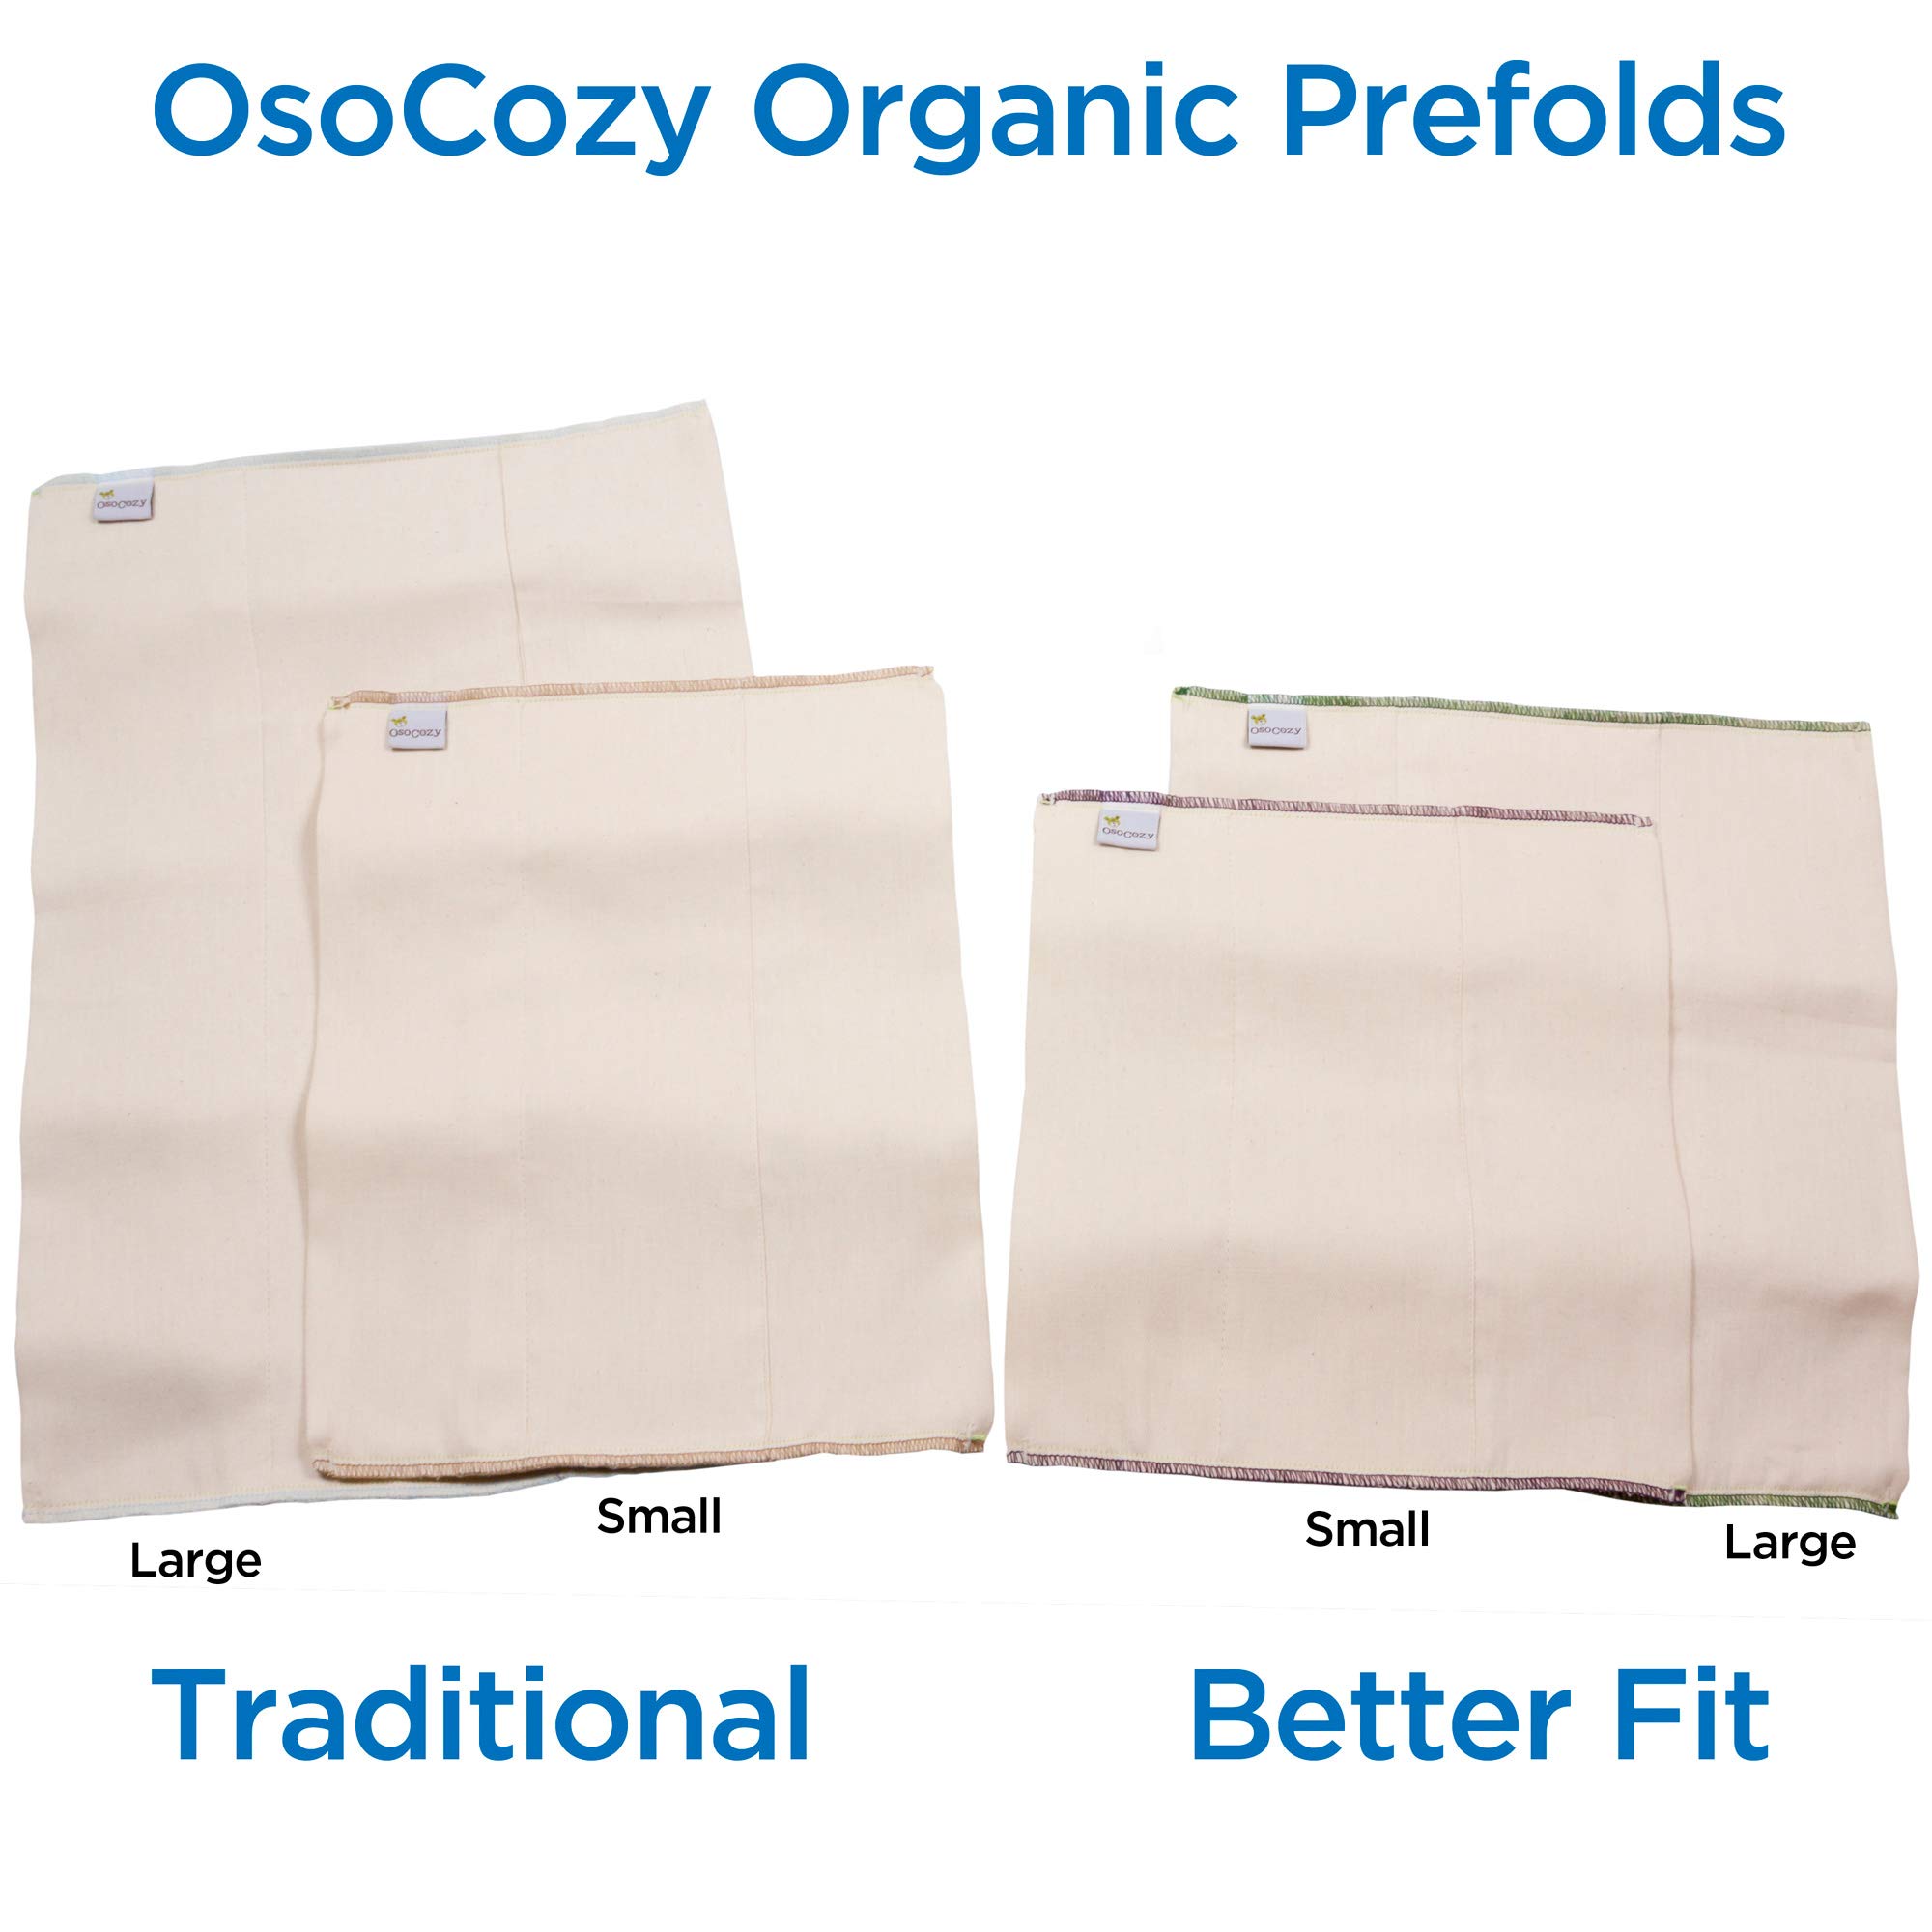 OsoCozy Organic Cotton Prefold Cloth Diapers Traditional Fit Large 4x8x4 Layering (6pk) - Super-Soft, Thick, Absorbent, Durable and Ecologically Friendlier. Unbleached Natural Color, Fits 15-30 Lbs.